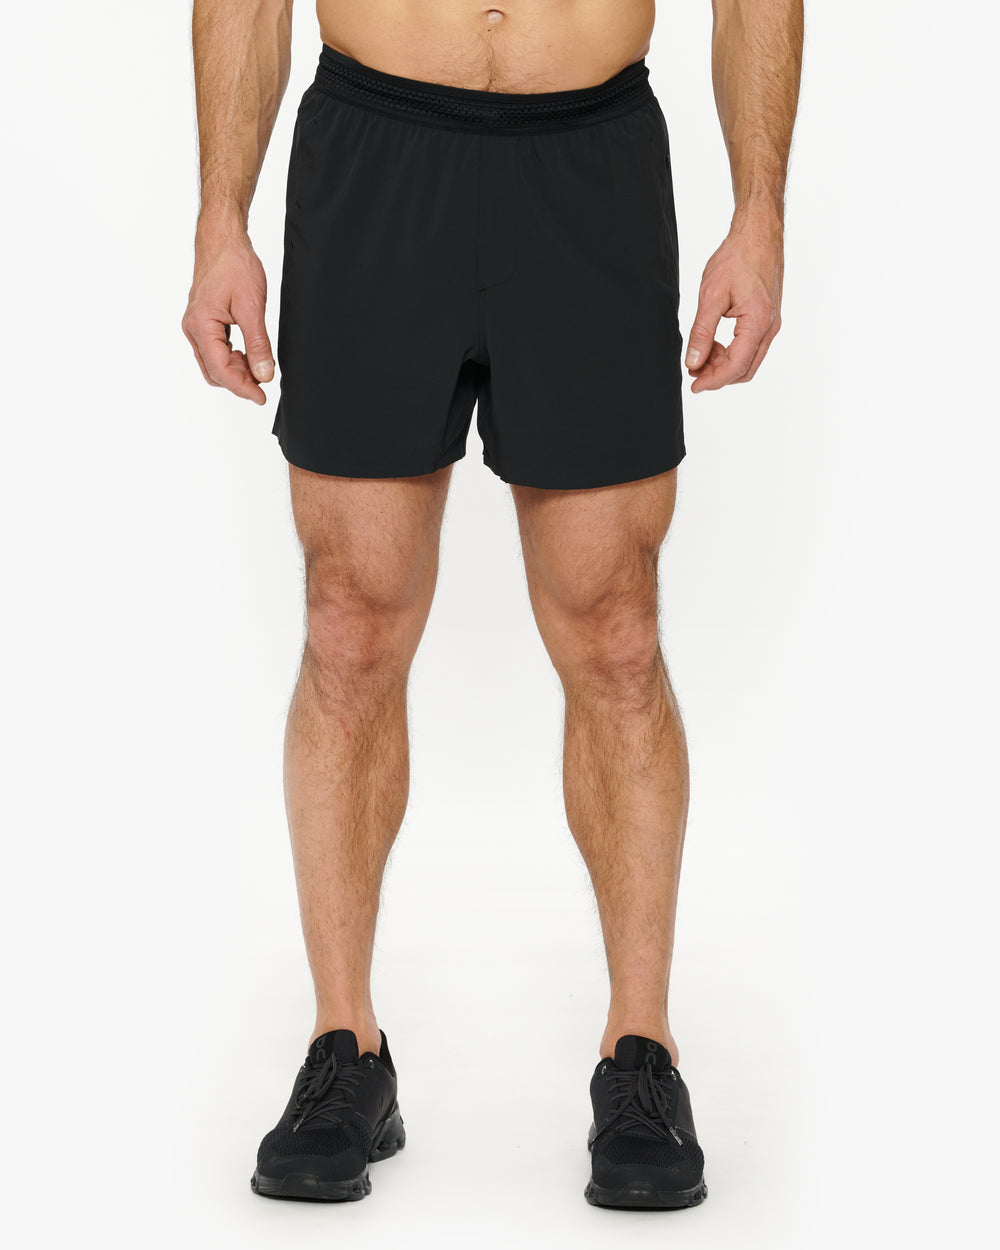 Ten Thousand Session Short 5 - Unlined